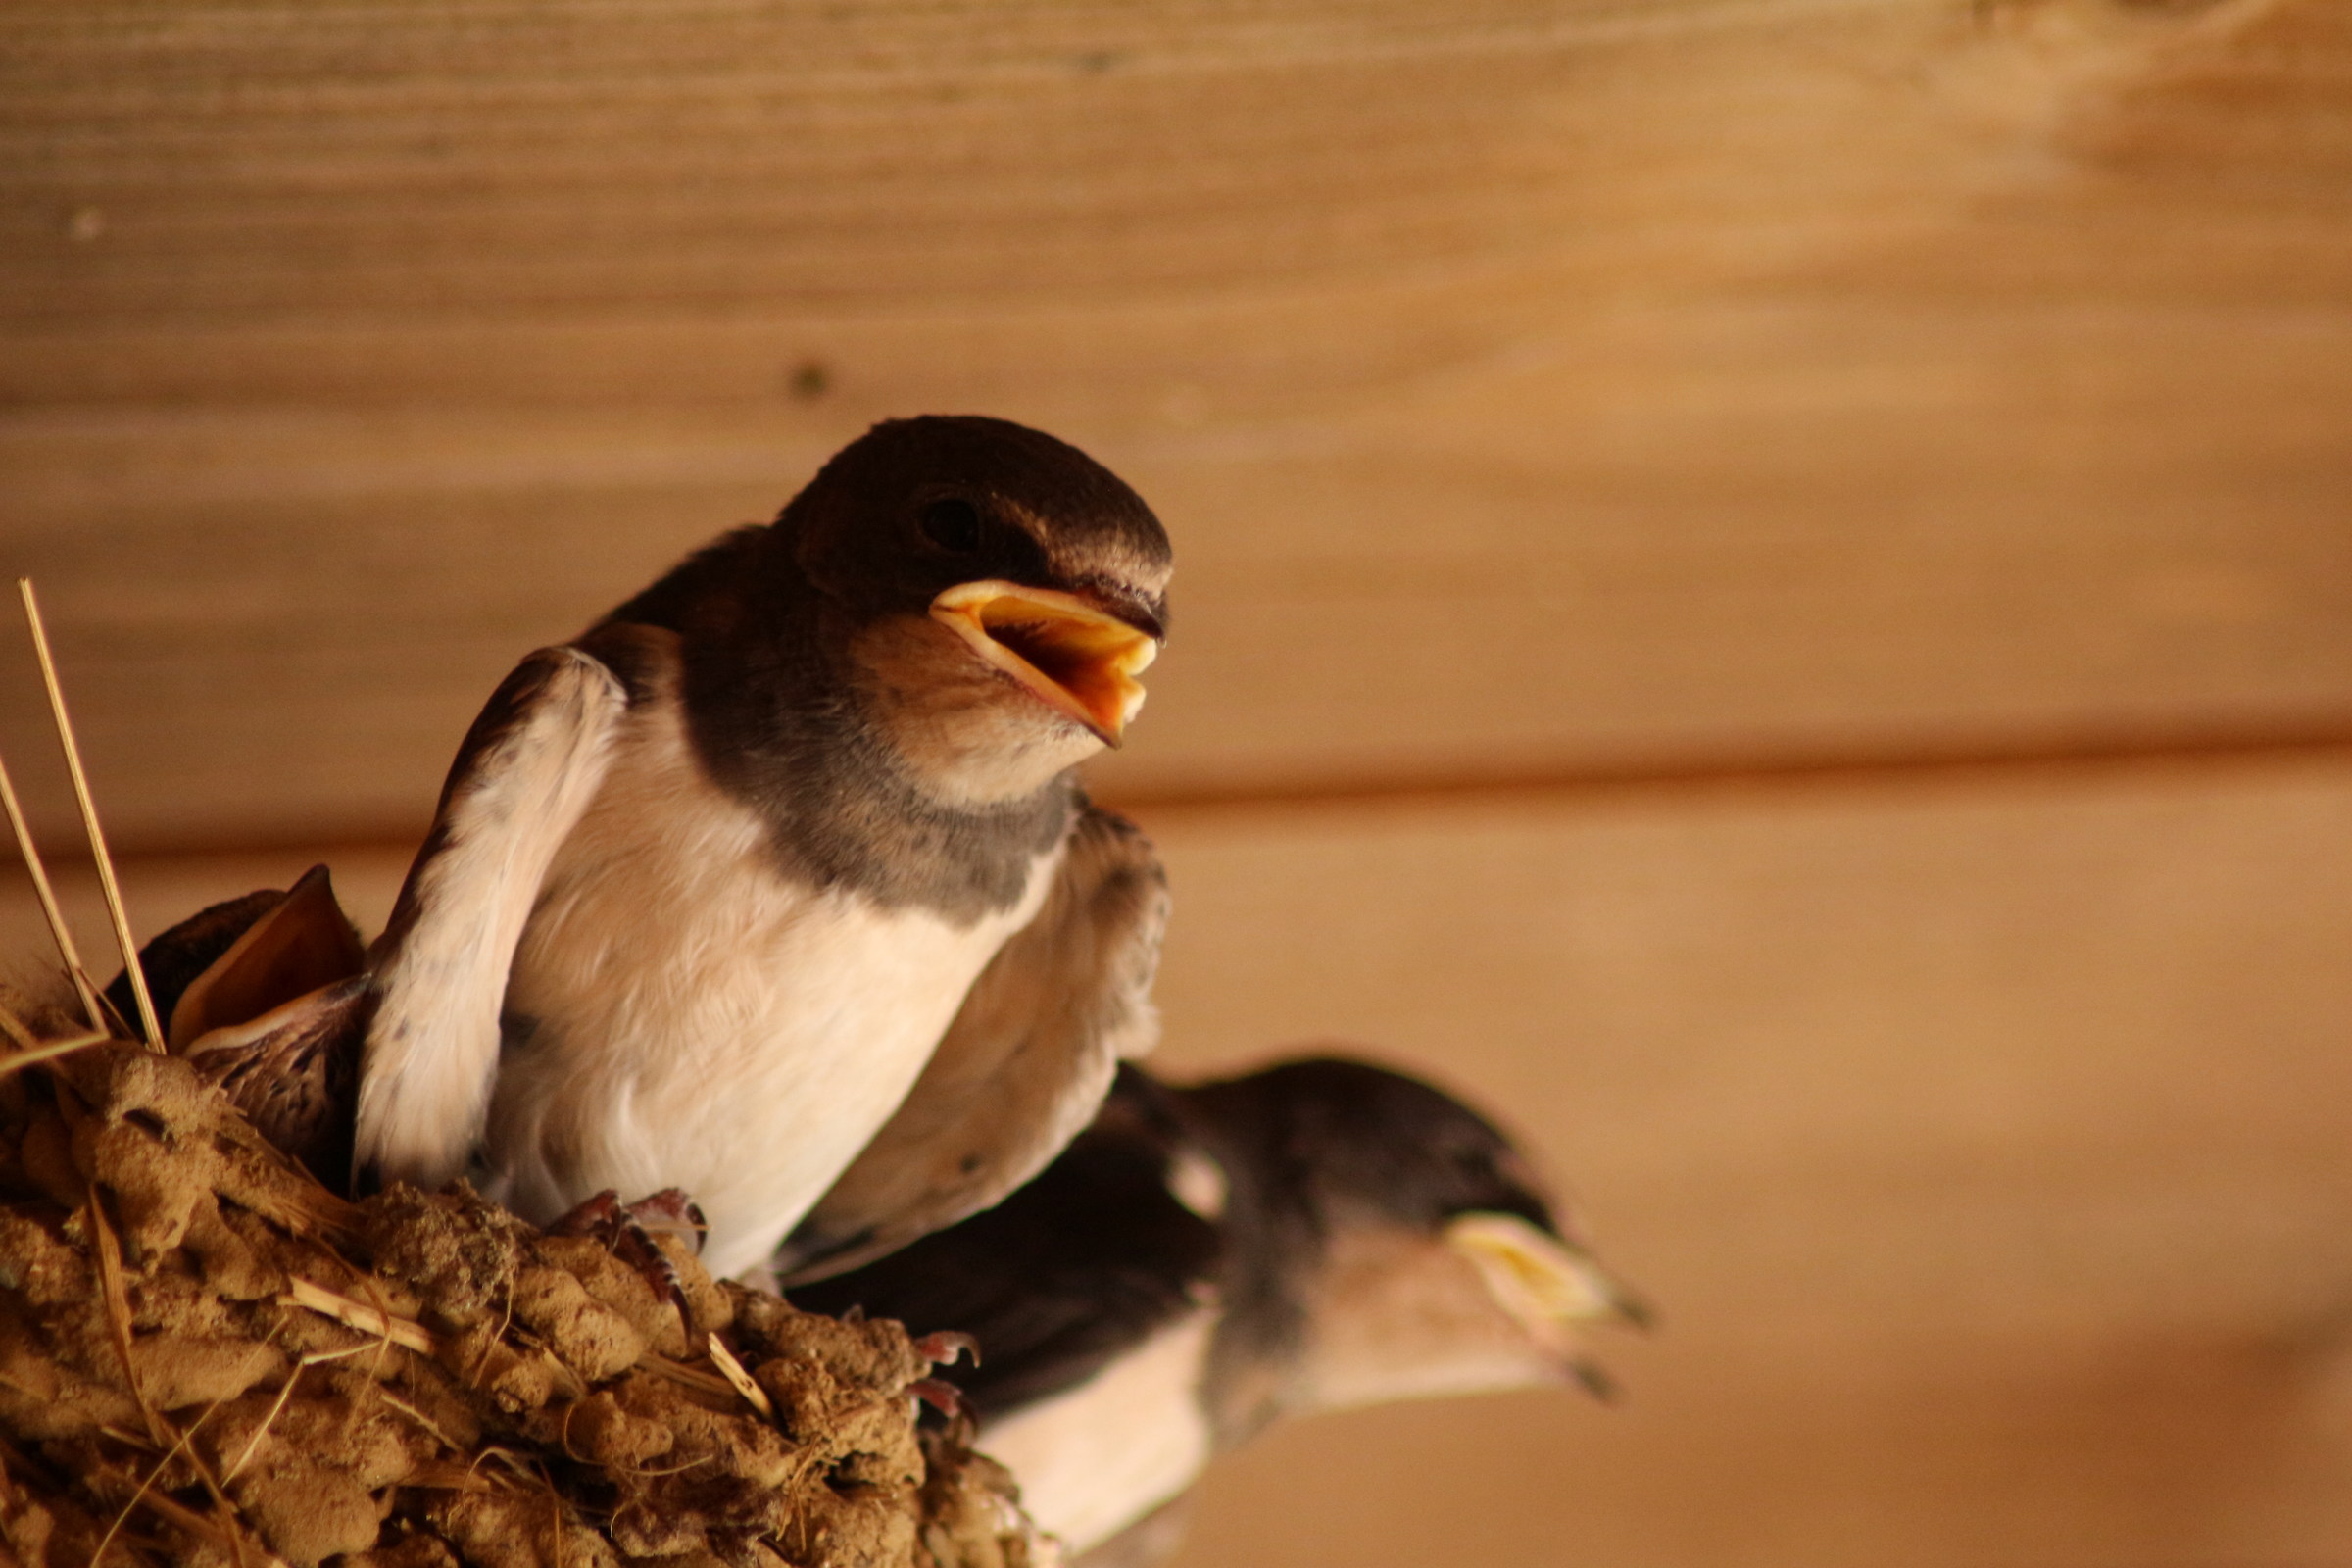 Swallows Waiting for meal...